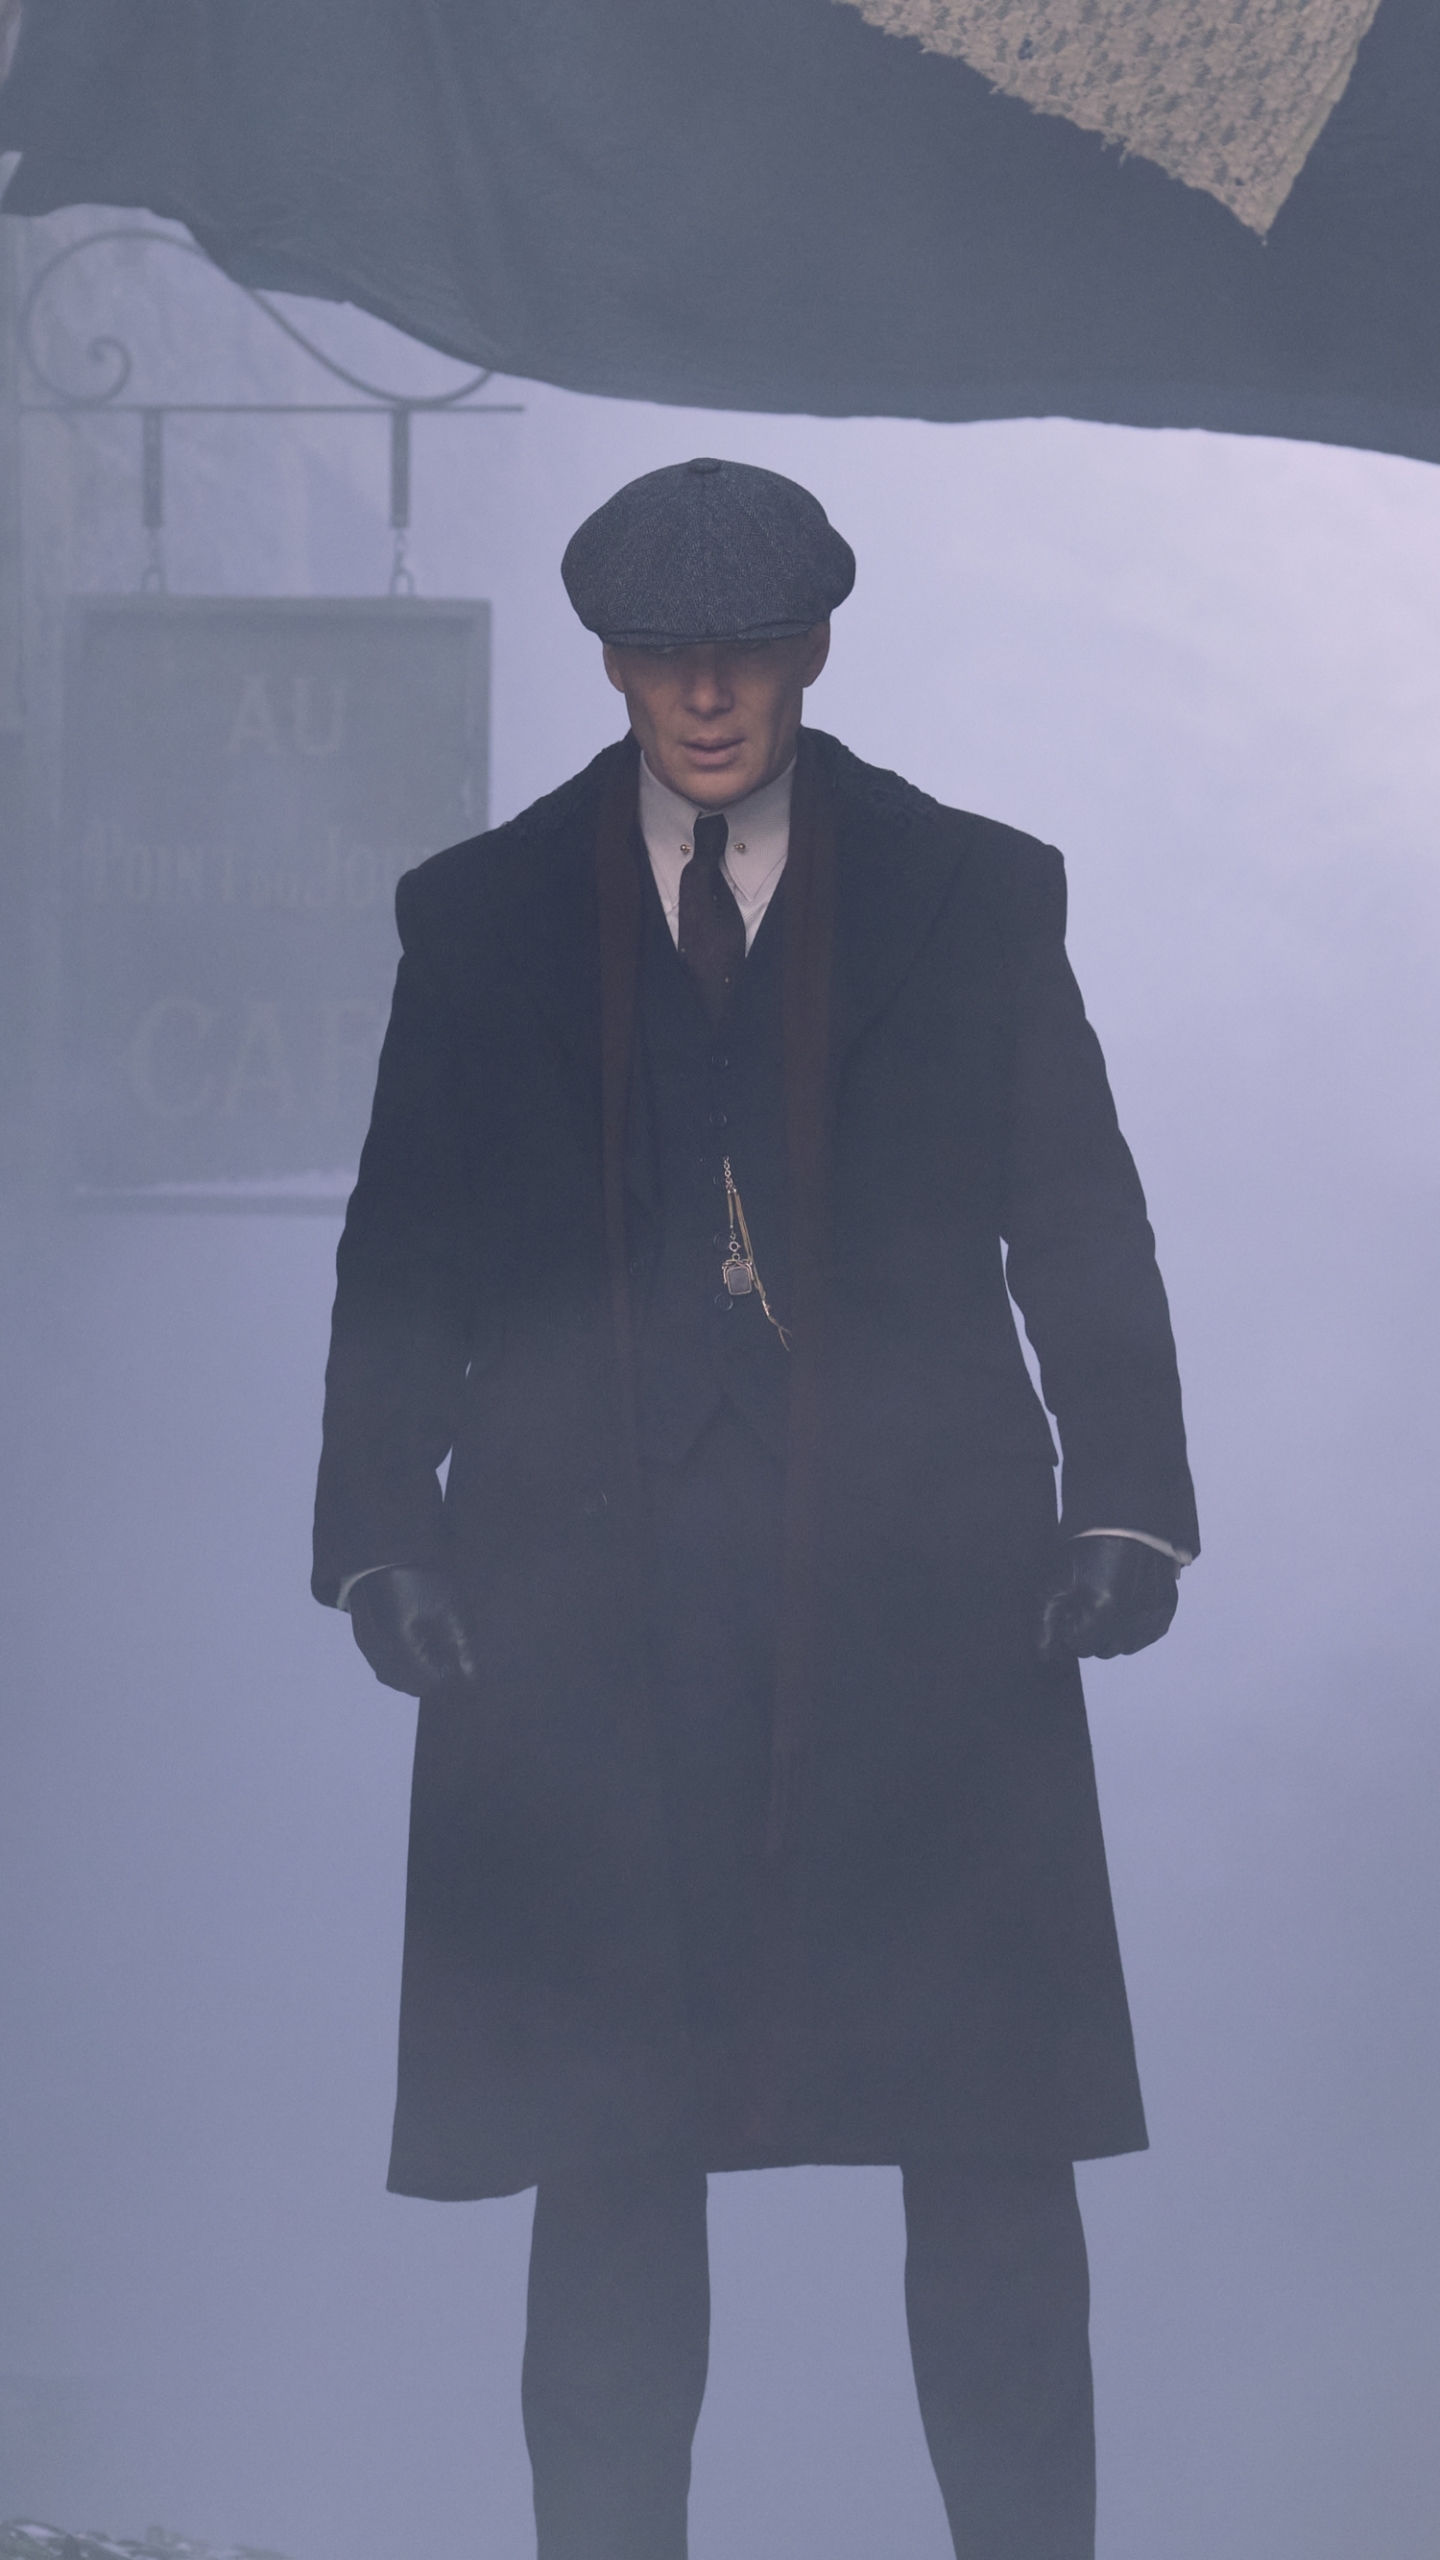 Thomas Shelby iPhone Wallpaper